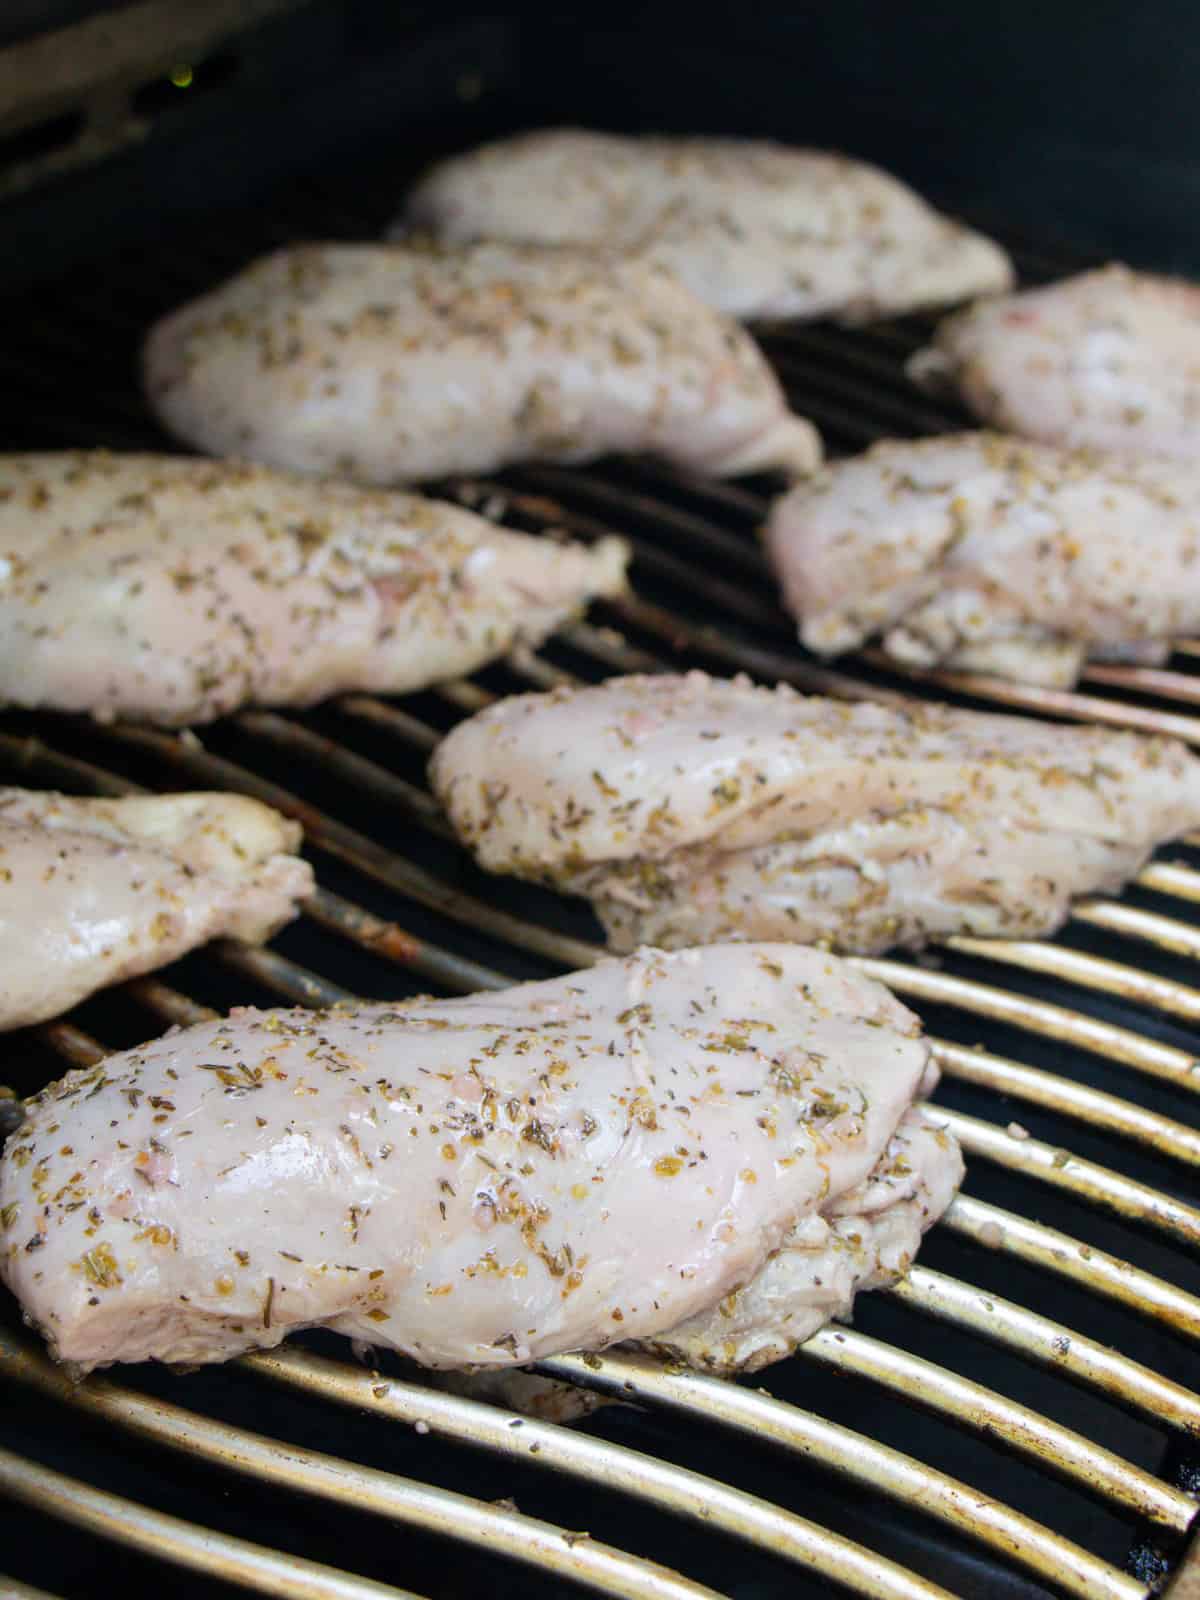 Raw chicken on a hot grill.